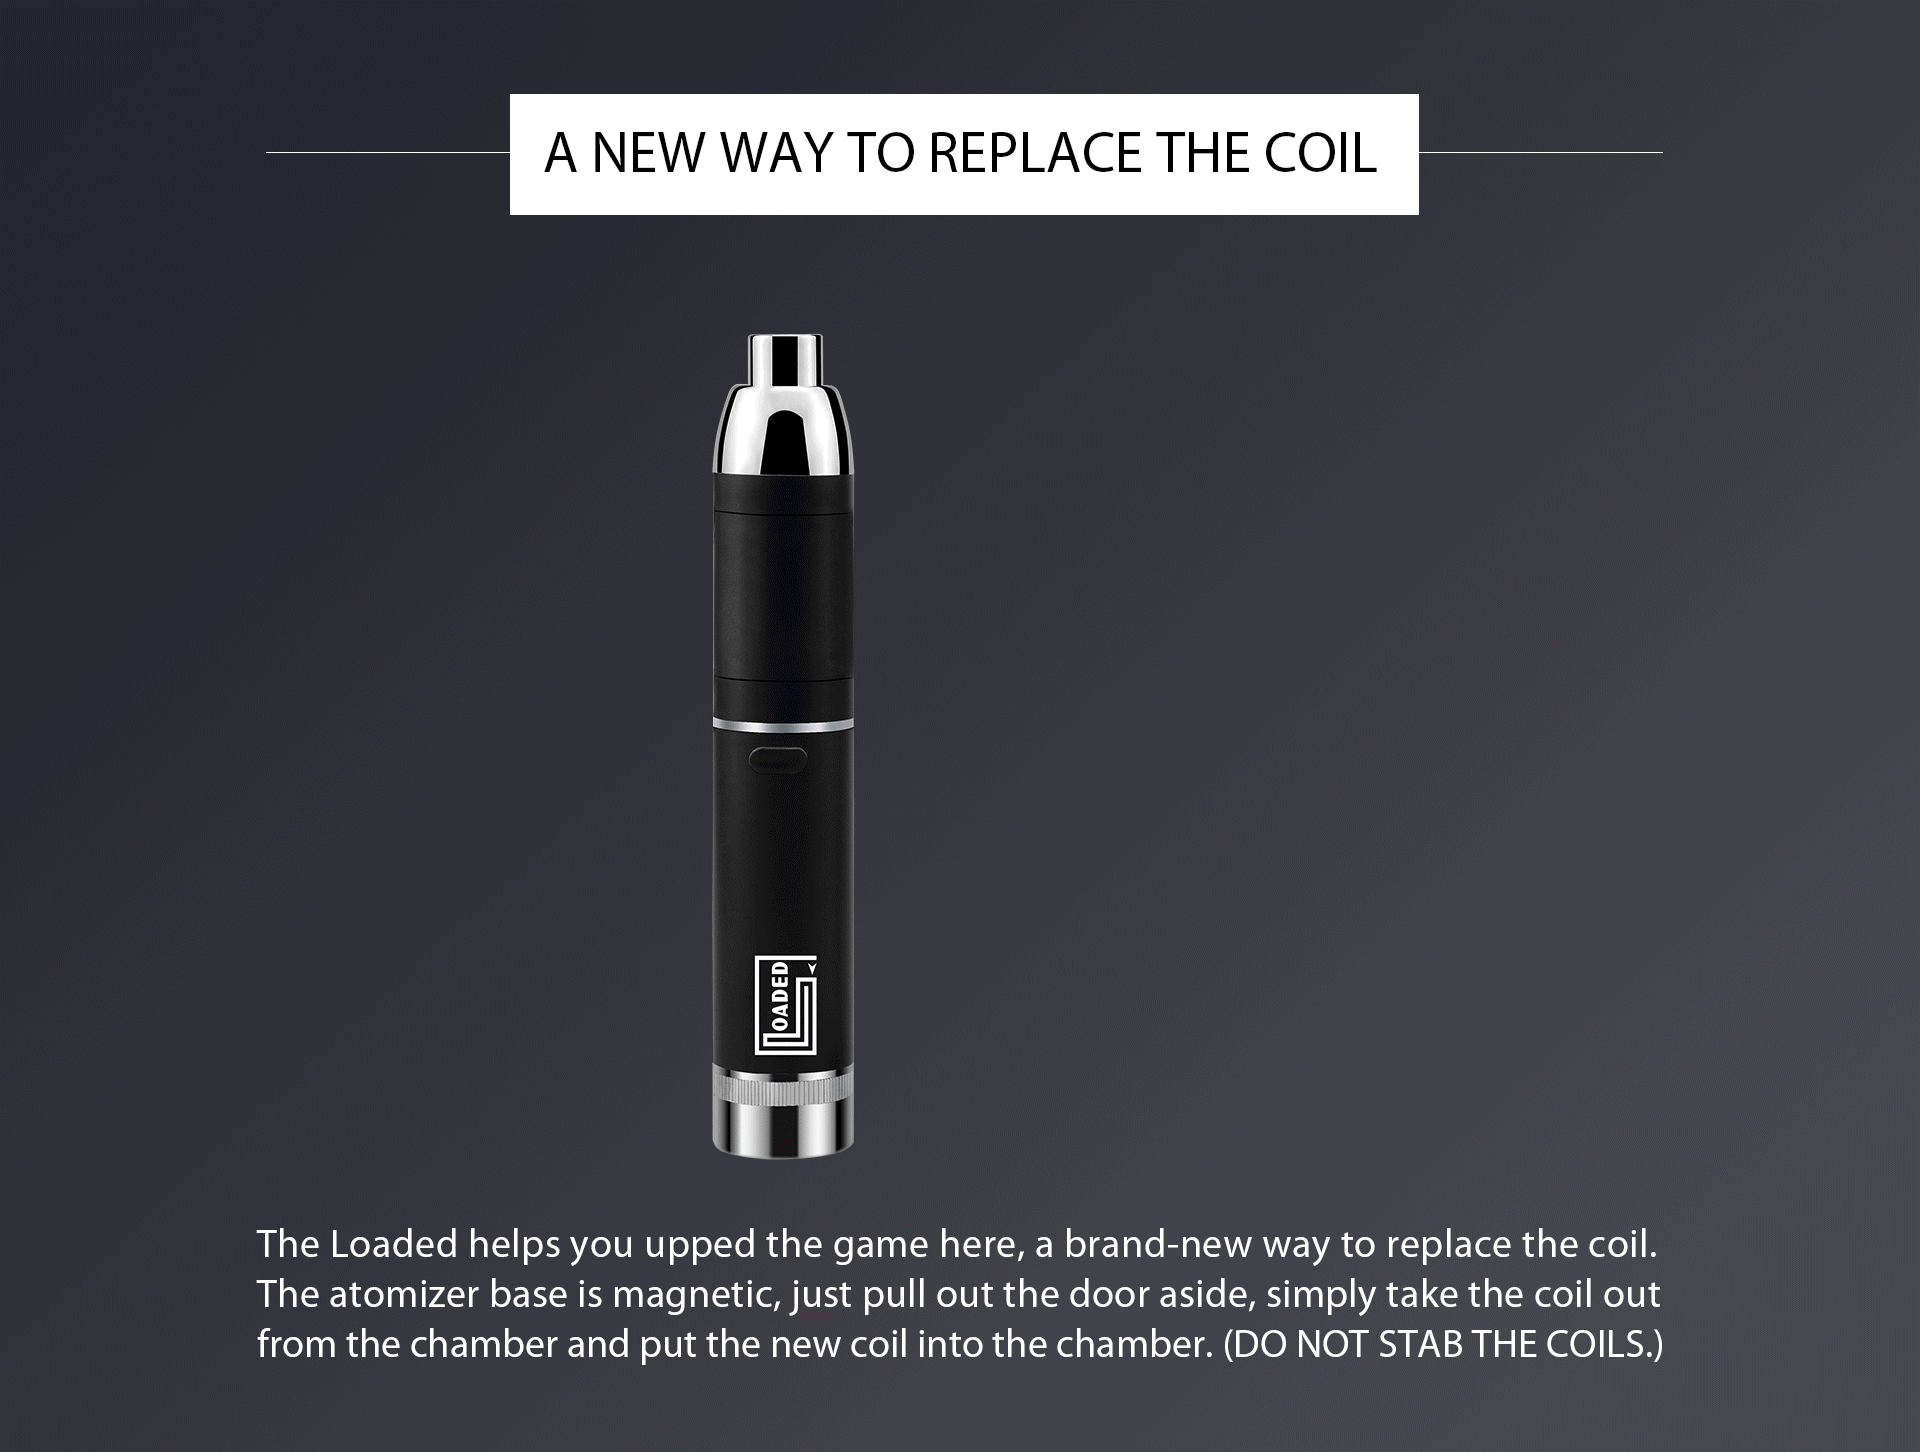 Yocan loaded helps your upped the game here, a brand-new wasy to replace the coil.